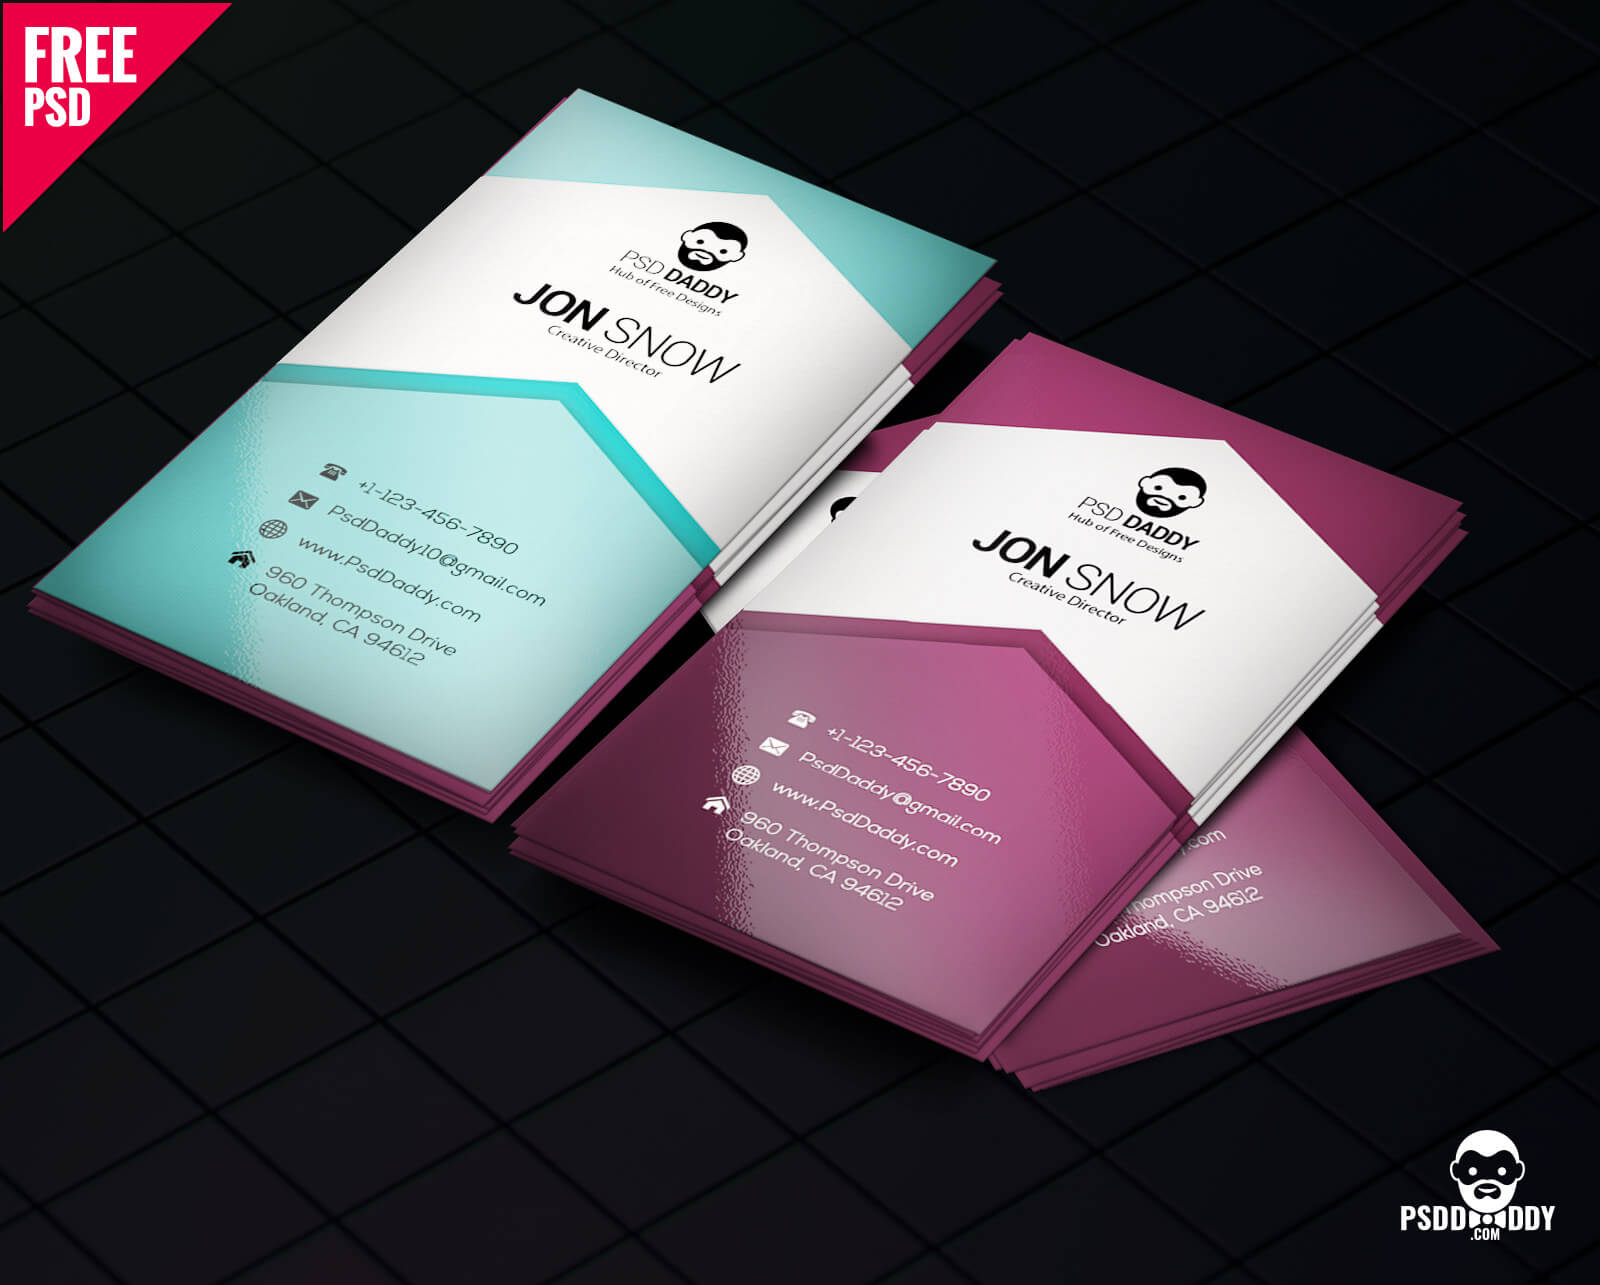 Download]Creative Business Card Psd Free | Psddaddy With Regard To Business Card Size Template Photoshop